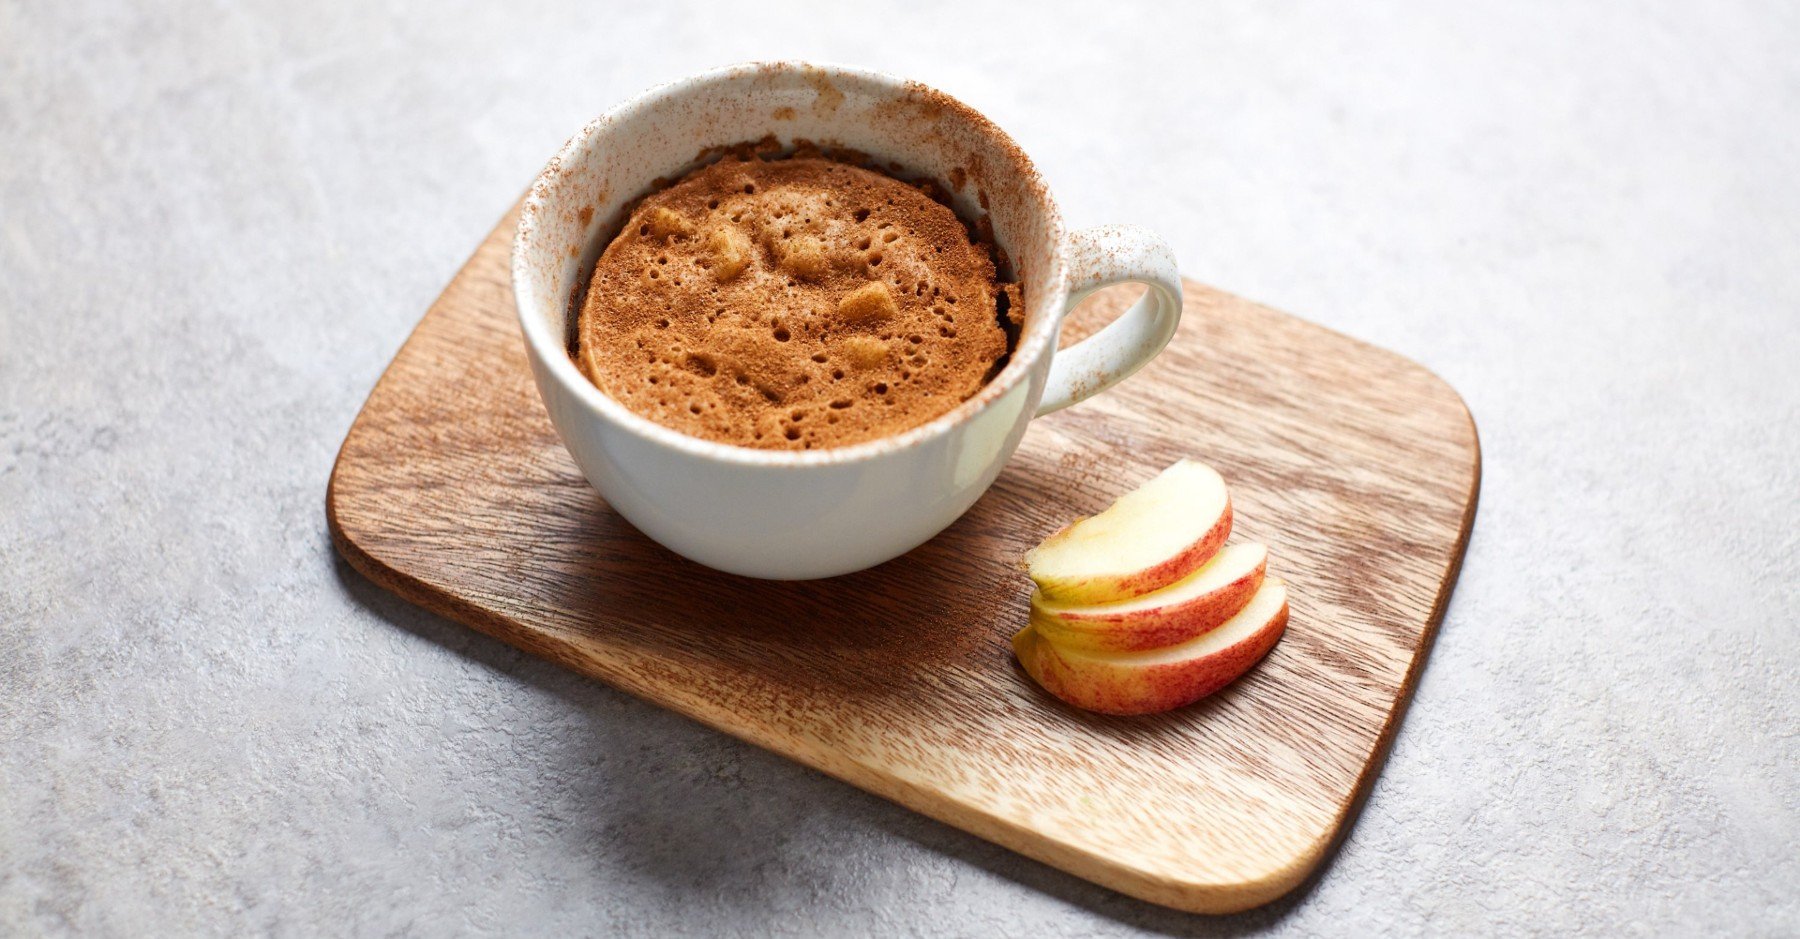 Spiced Apple Protein Mug Cake | Desserts You Can Make In The Microwave